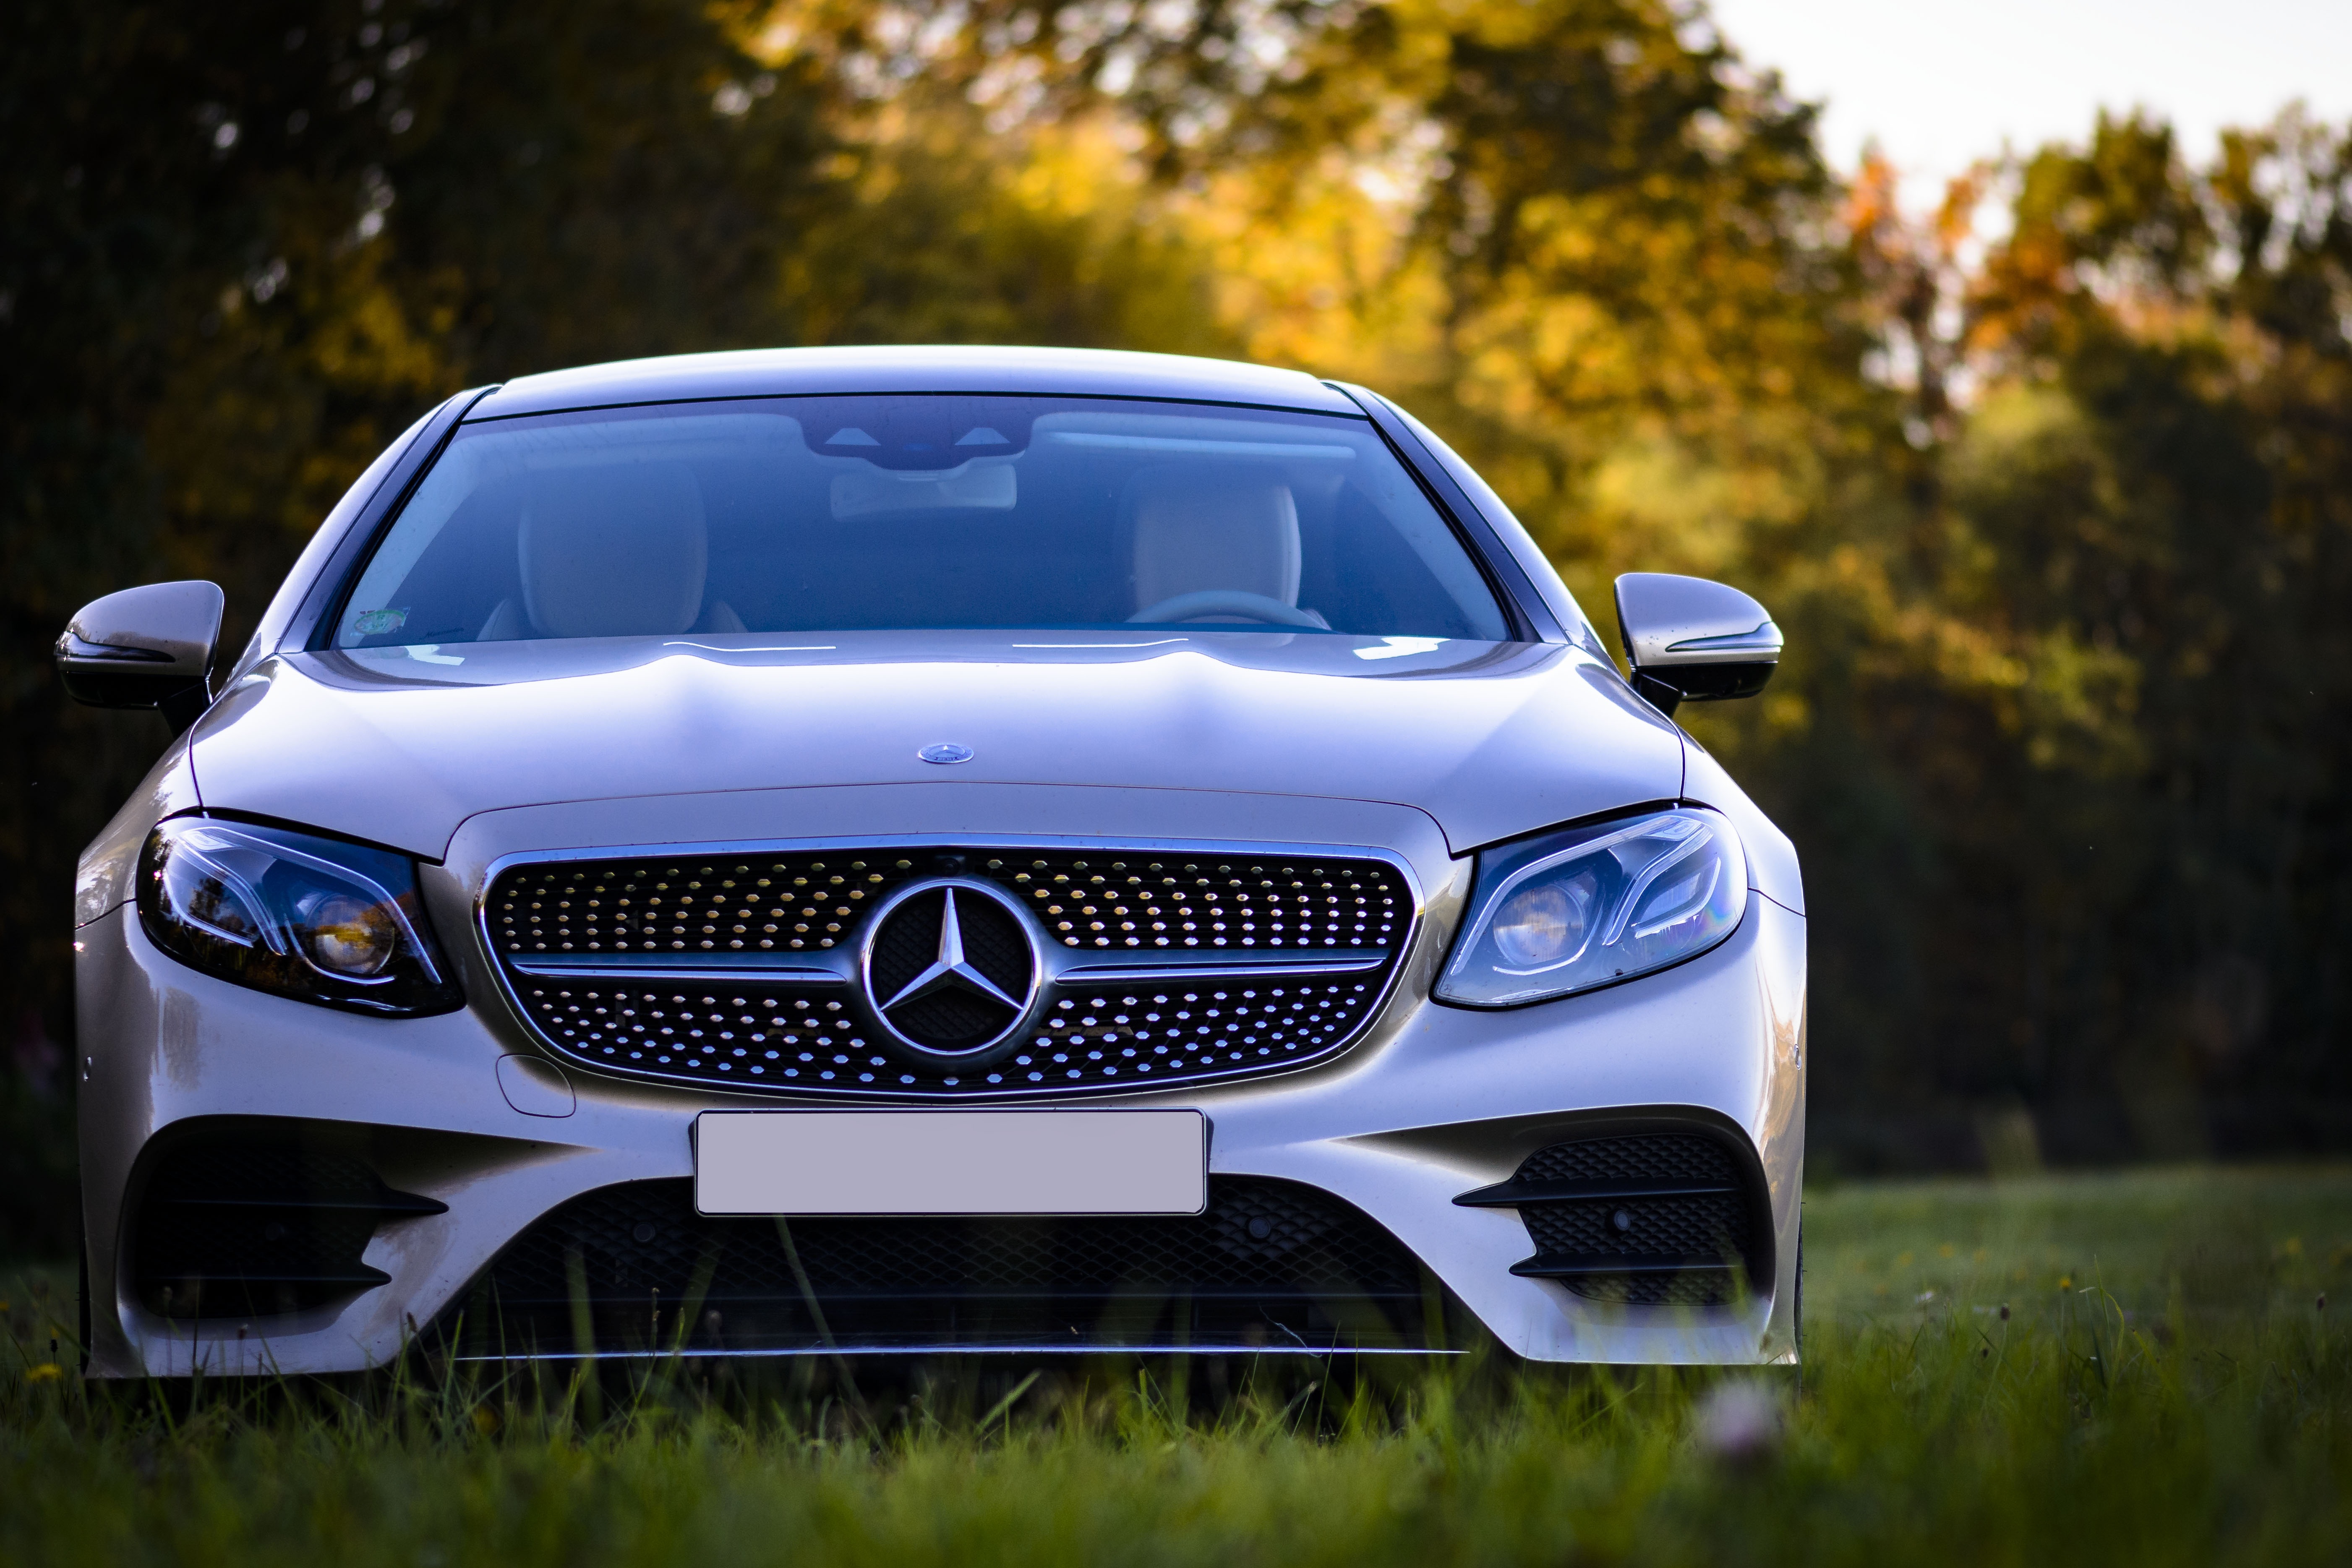 67300 download wallpaper cars, car, front view, mercedes-benz, mercedes, modern, up to date, silver, silvery screensavers and pictures for free